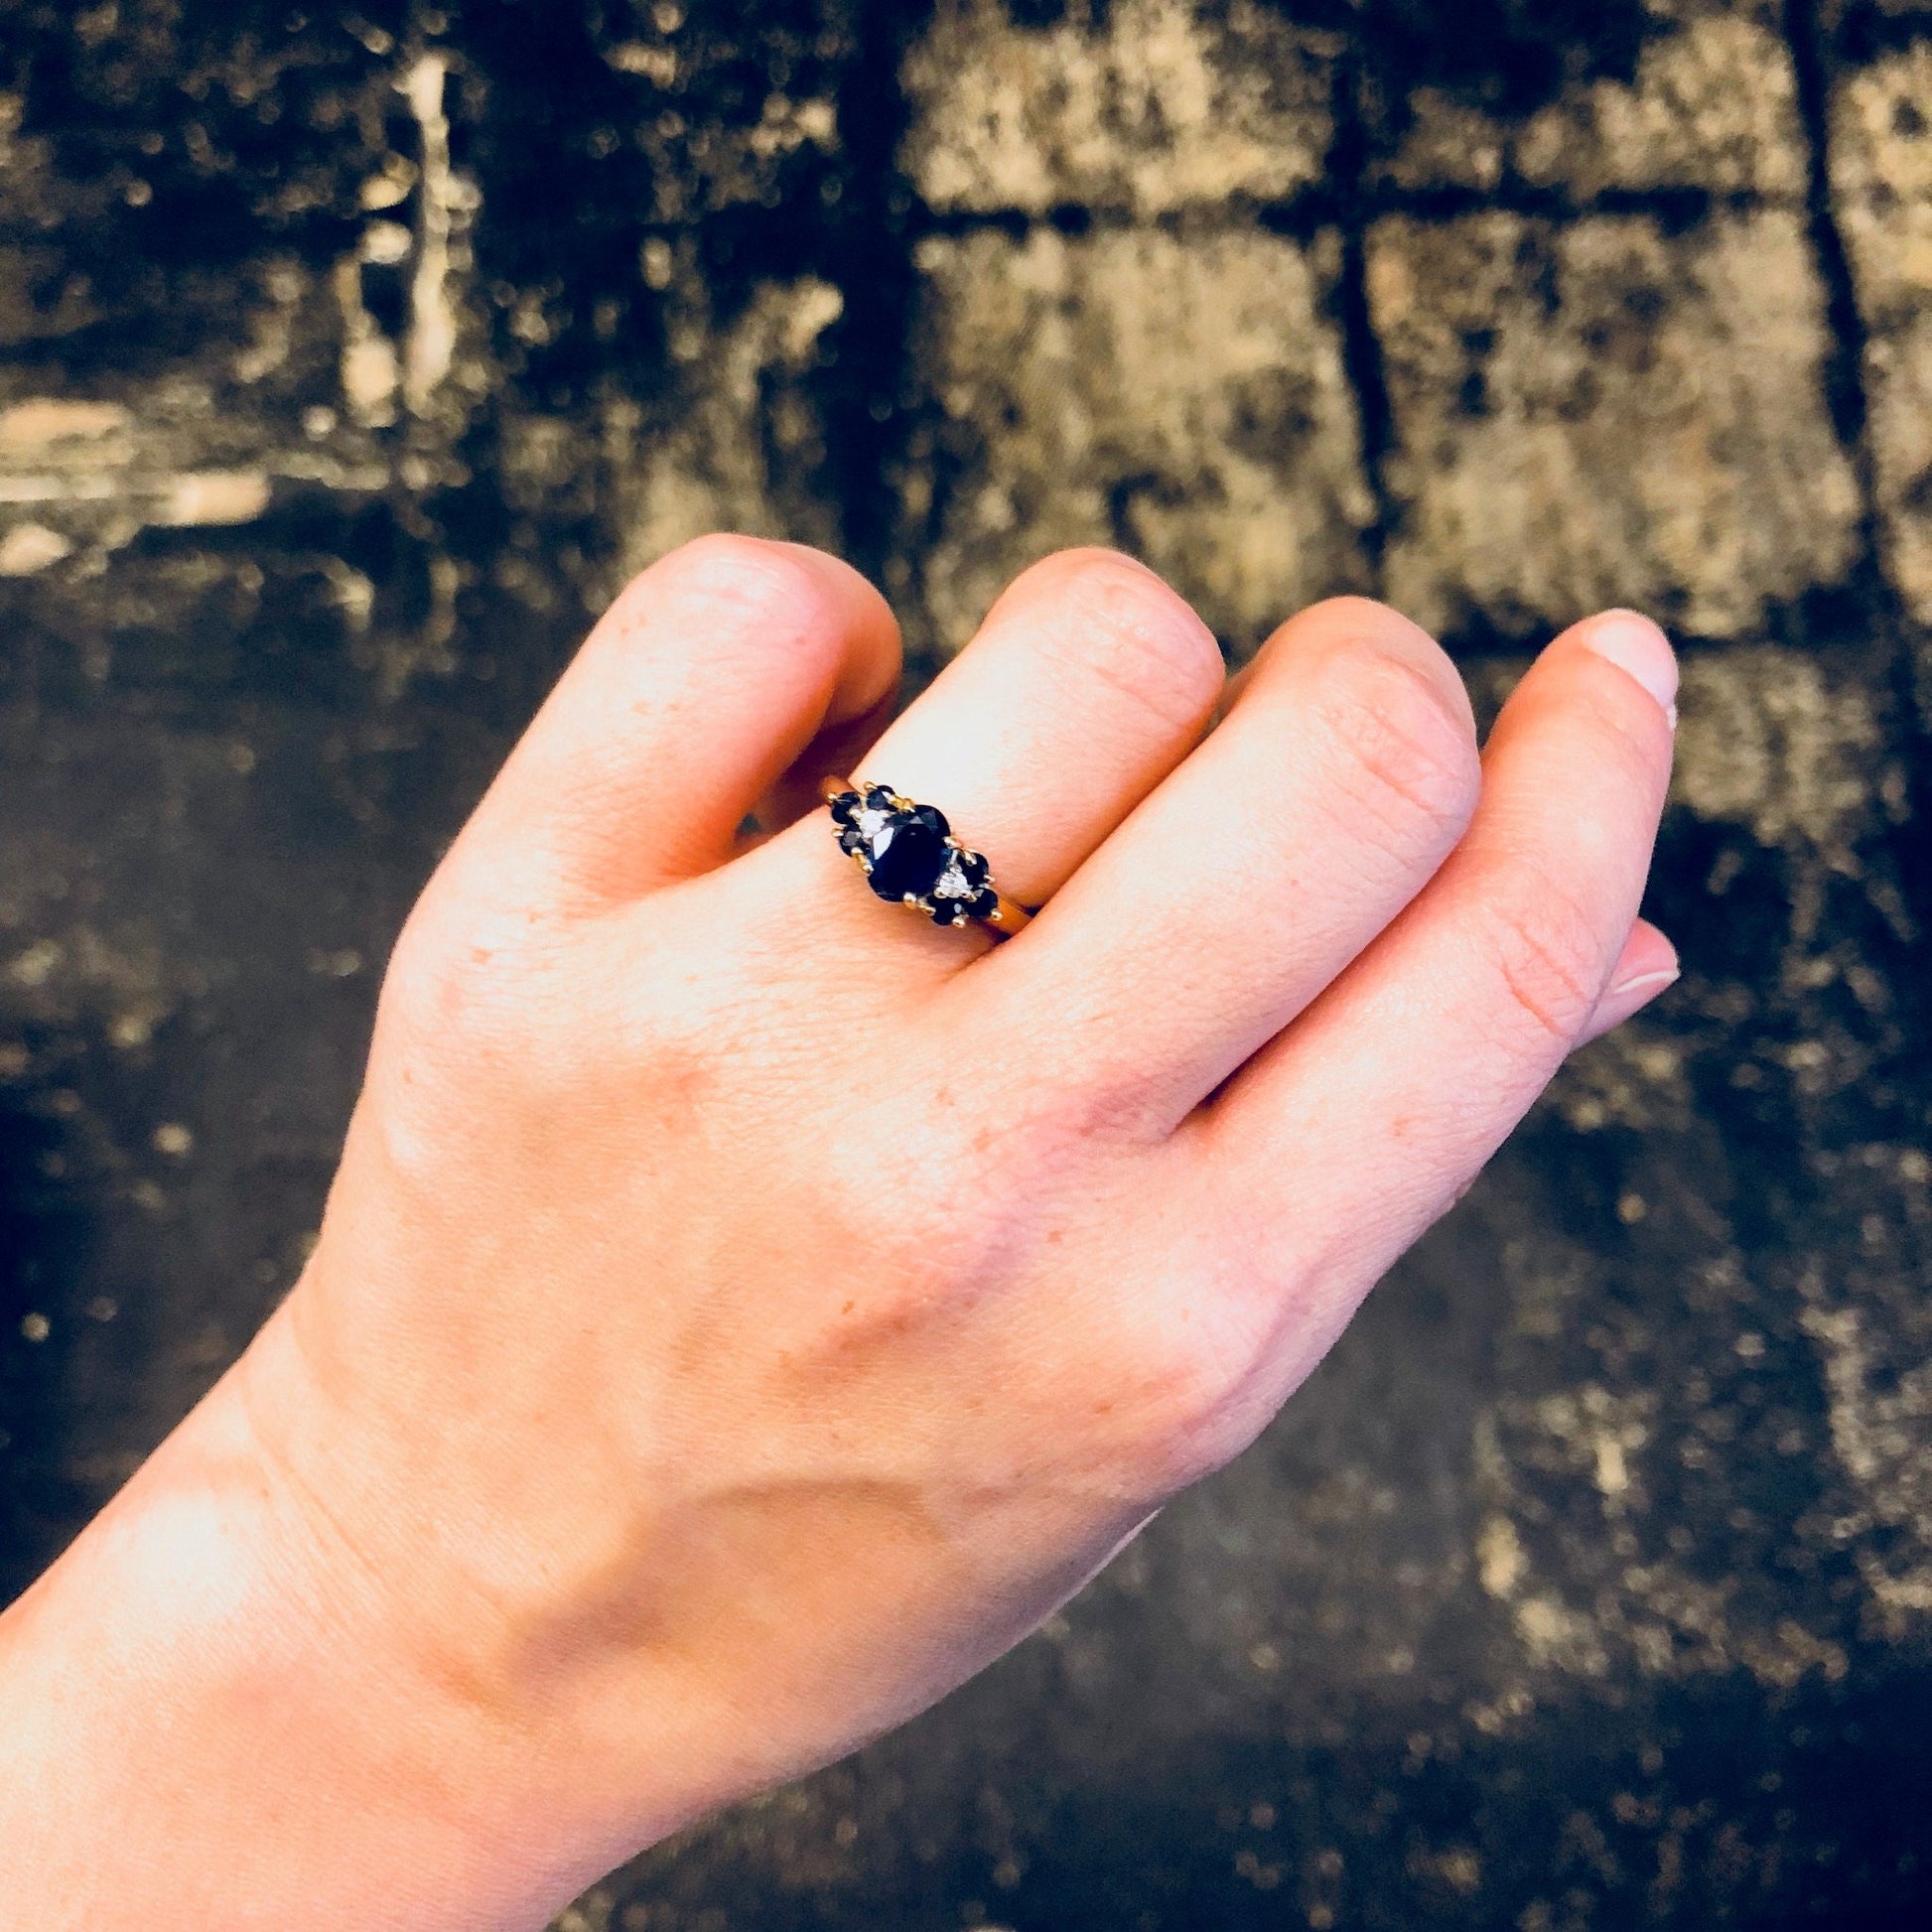 Vintage sapphire and 14K yellow gold ring displayed on a hand against a distressed wooden background.